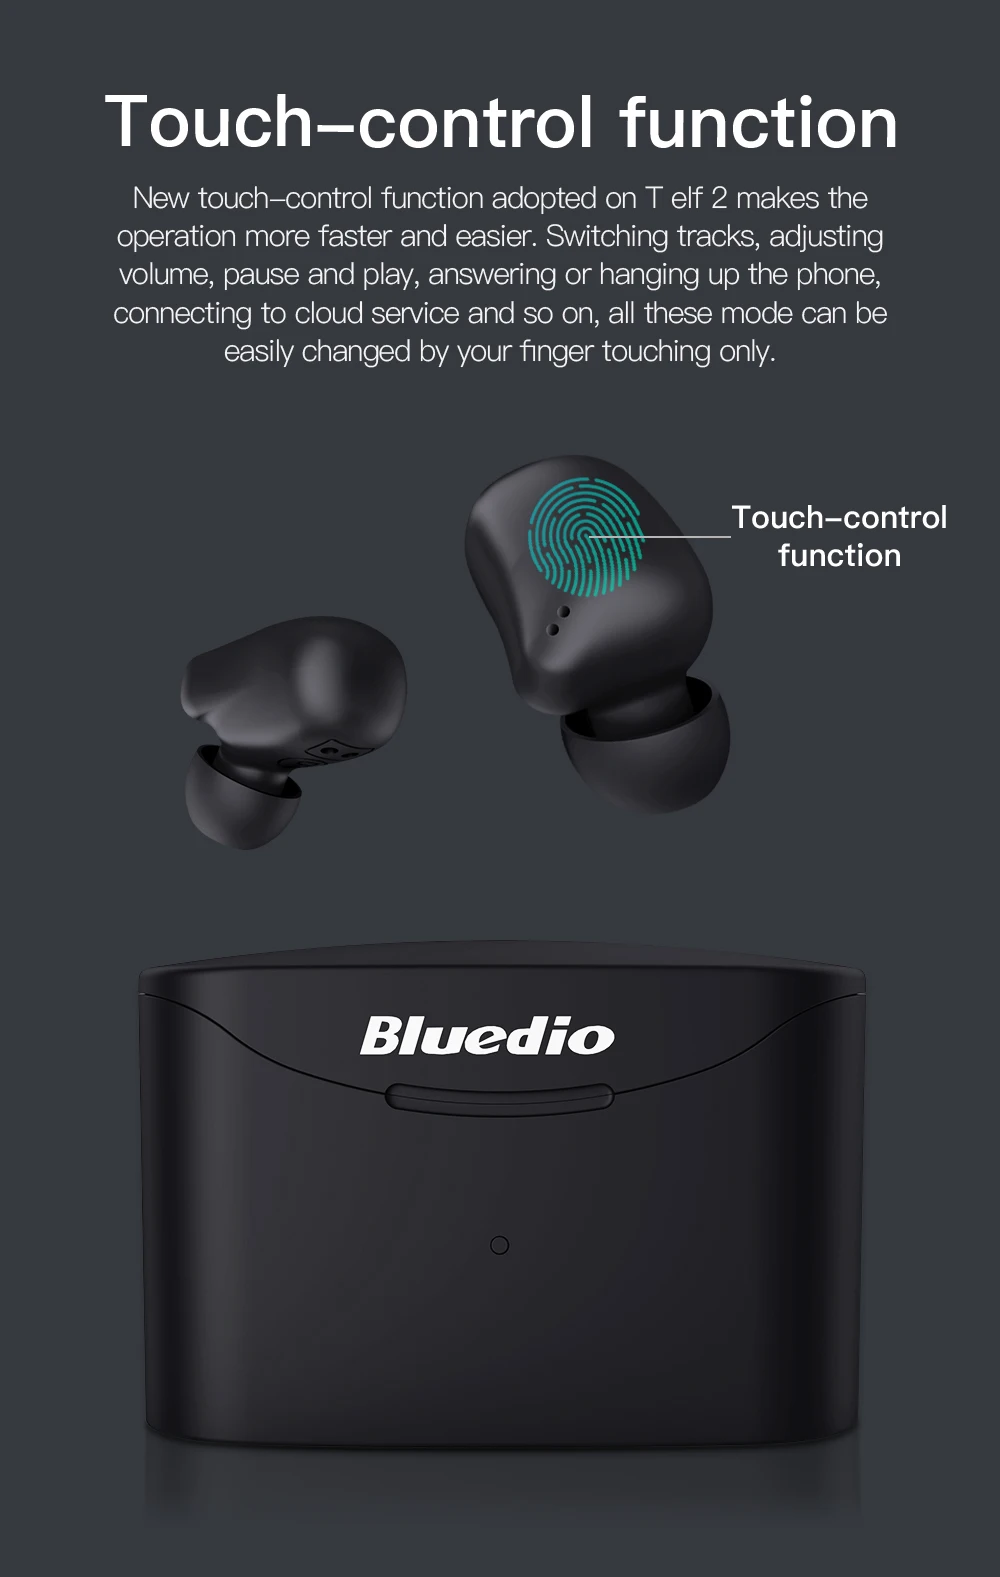 Bluedio wireless bluetooth earphone for phone T-elf 2 TWS stereo sport earbuds headset with charging box built-in microphone